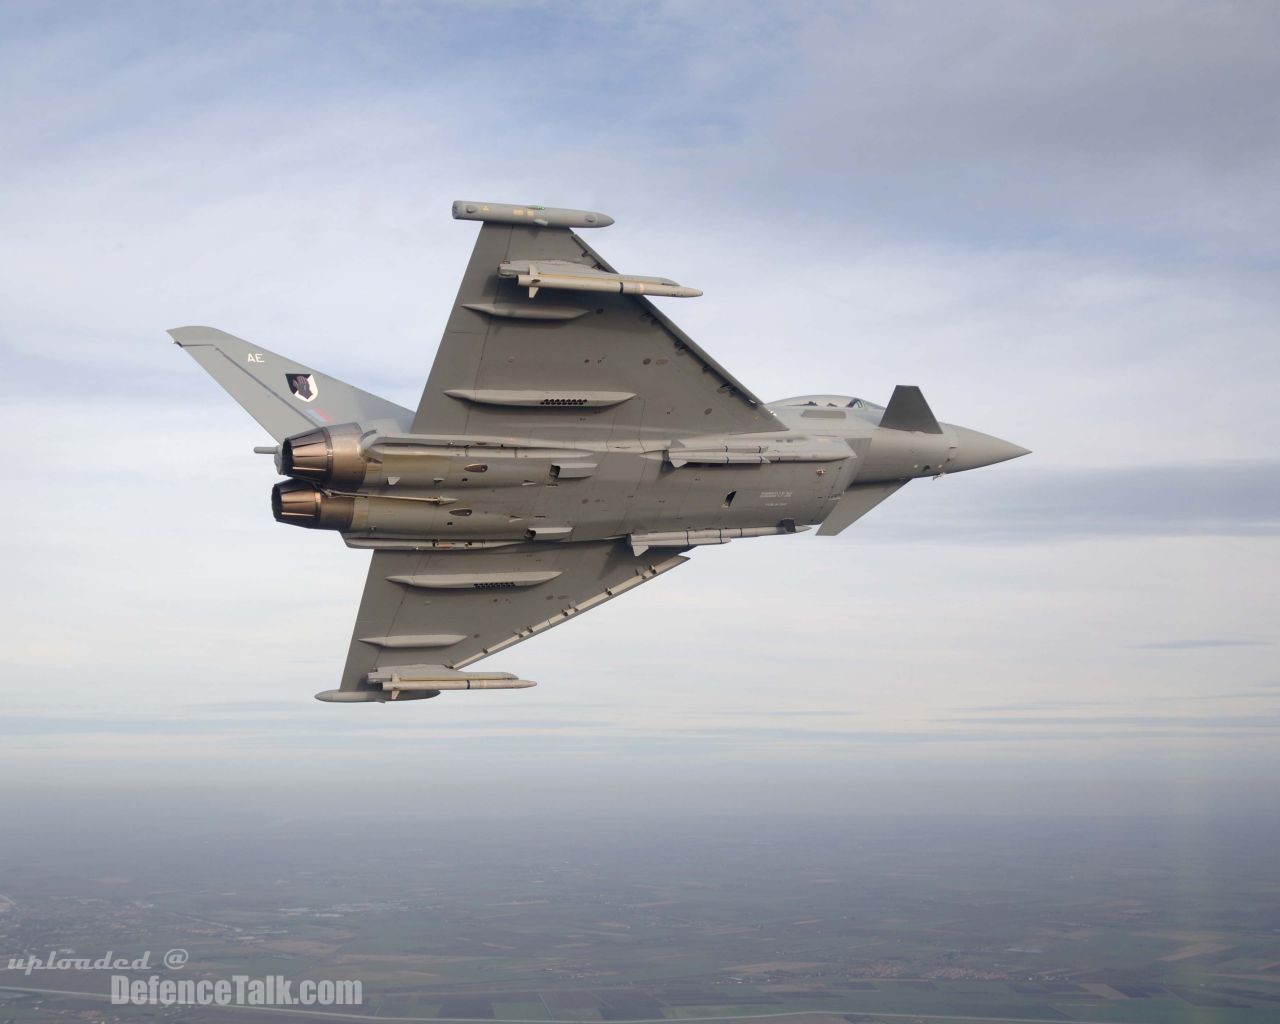 EuroFighter flies with Meteor missile